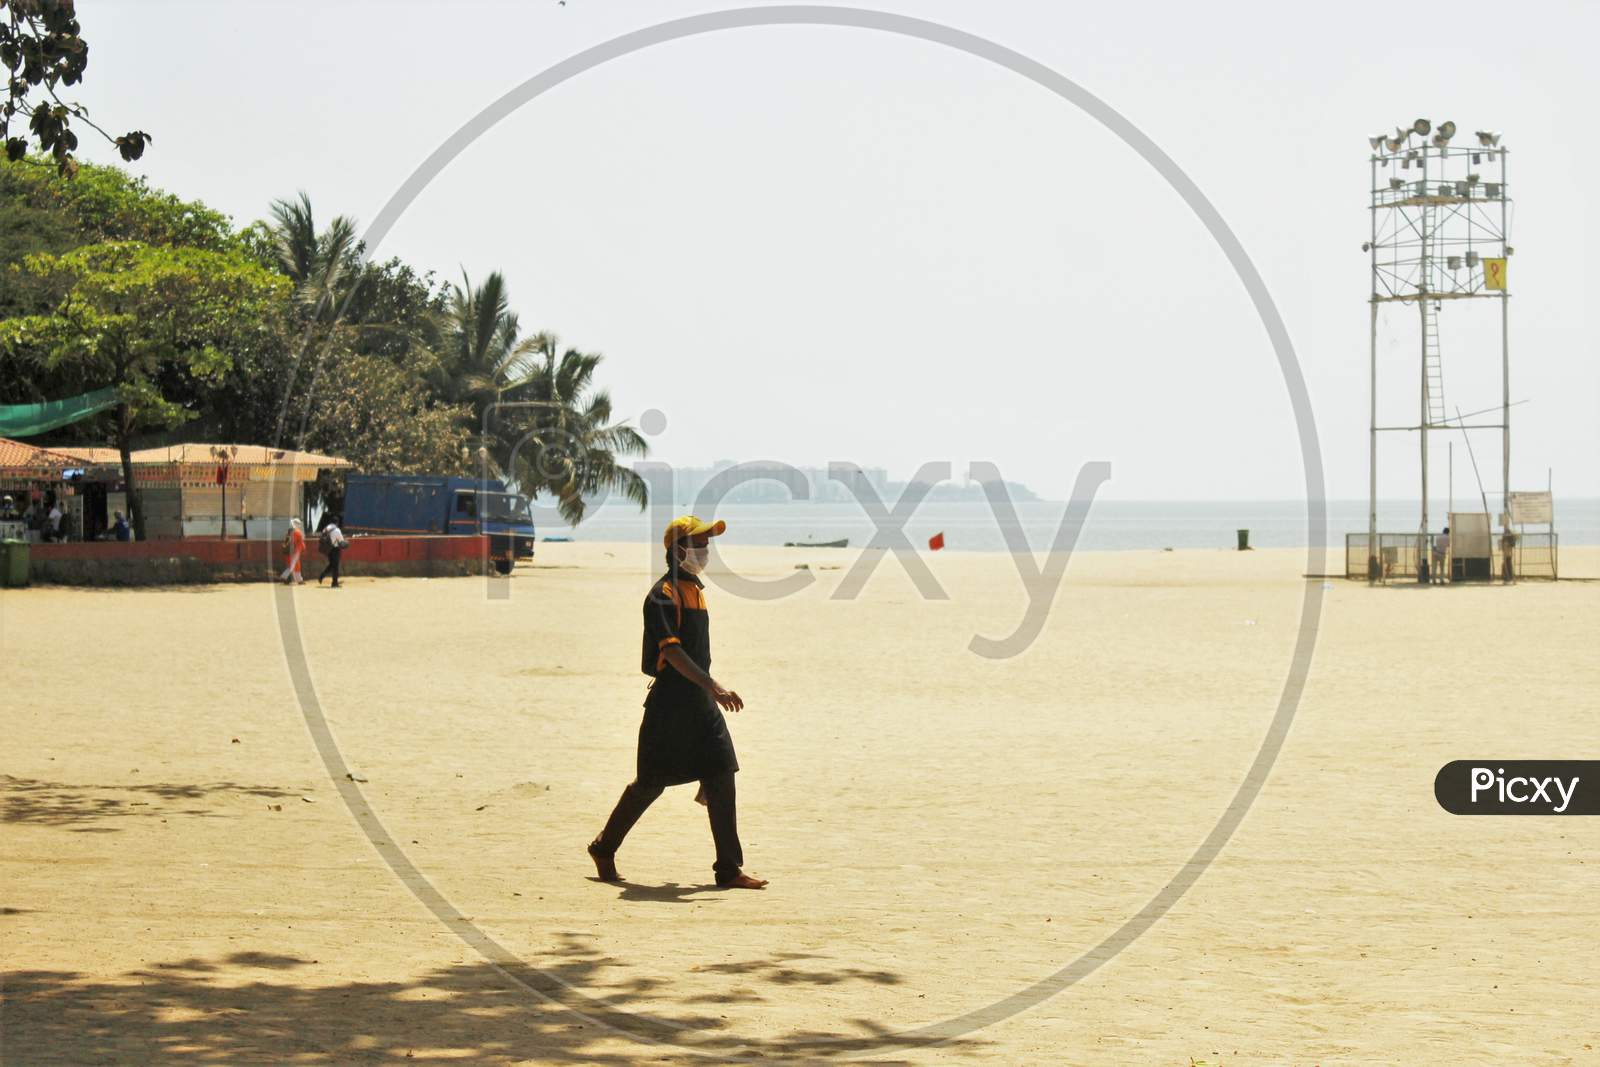 A man wearing a protective mask walks on deserted Girgaon Chowpatty after the Maharashtra state government banned public gatherings to avoid the spreading of the coronavirus, in Mumbai, India on March 18, 2020.